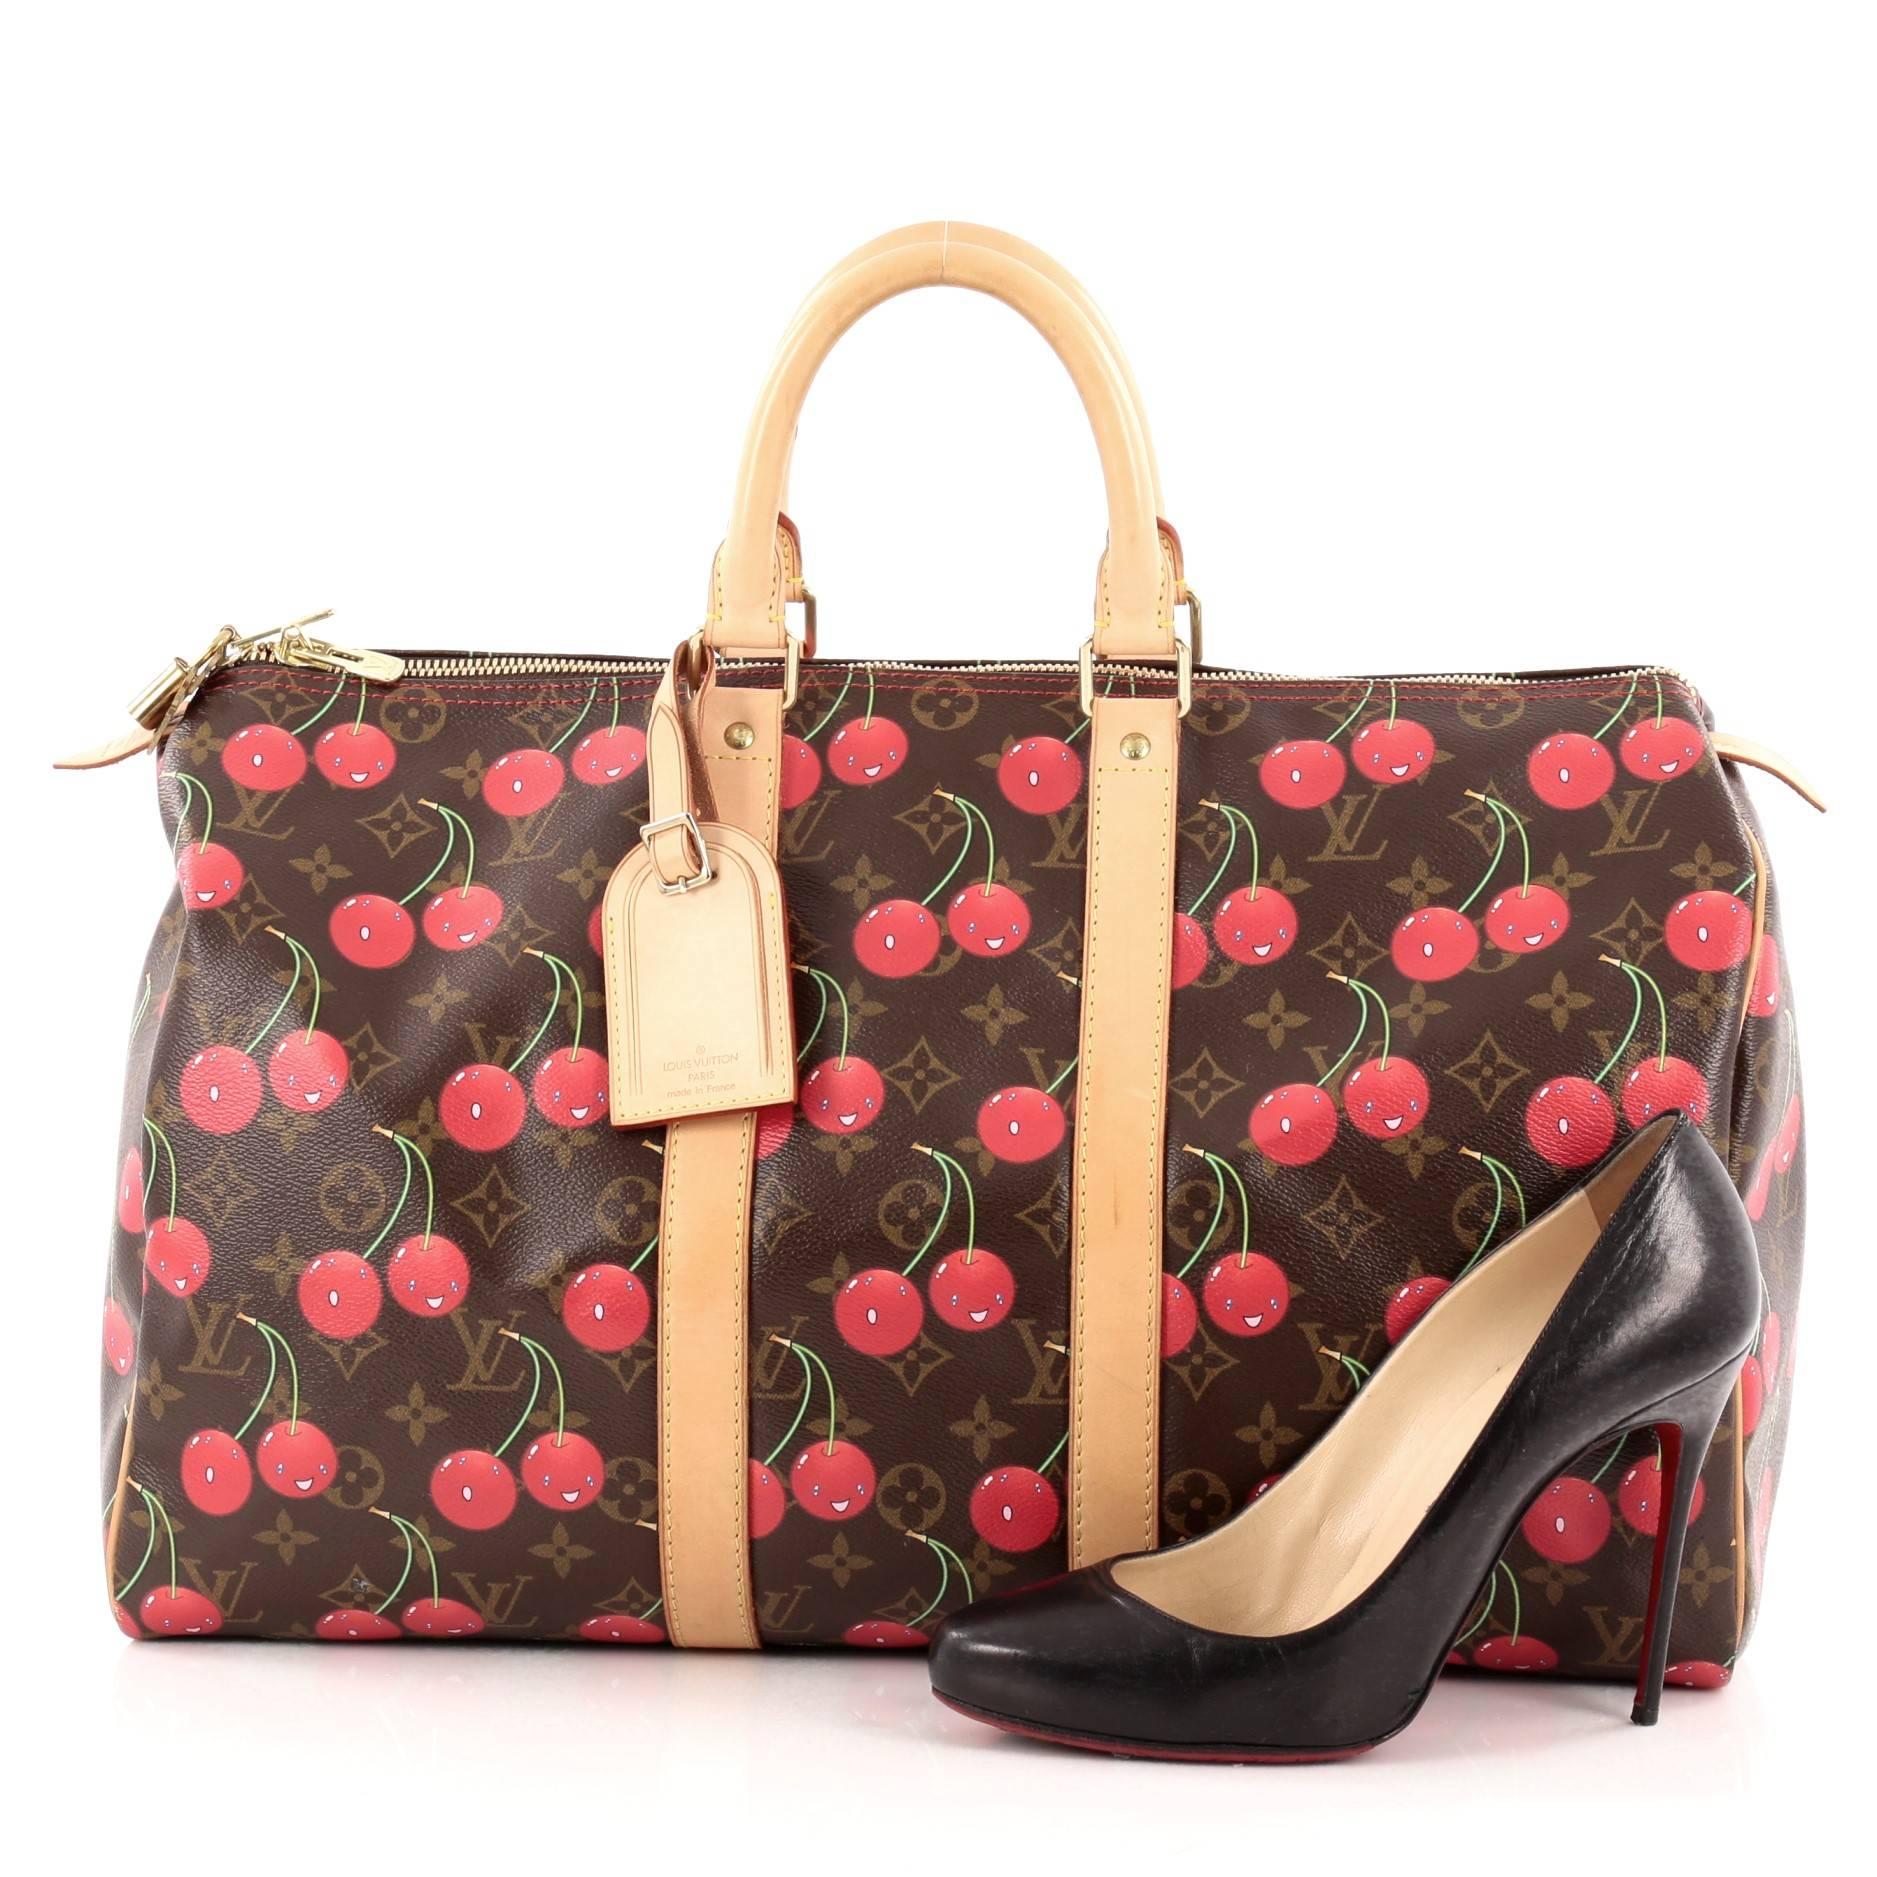 This authentic Louis Vuitton Keepall Bag Limited Edition Cerises 45 is a must-have travel bag for LV collectors everywhere. Crafted from brown monogram canvas adorned with bright cheerful cherries, this limited edition luggage features dual-rolled